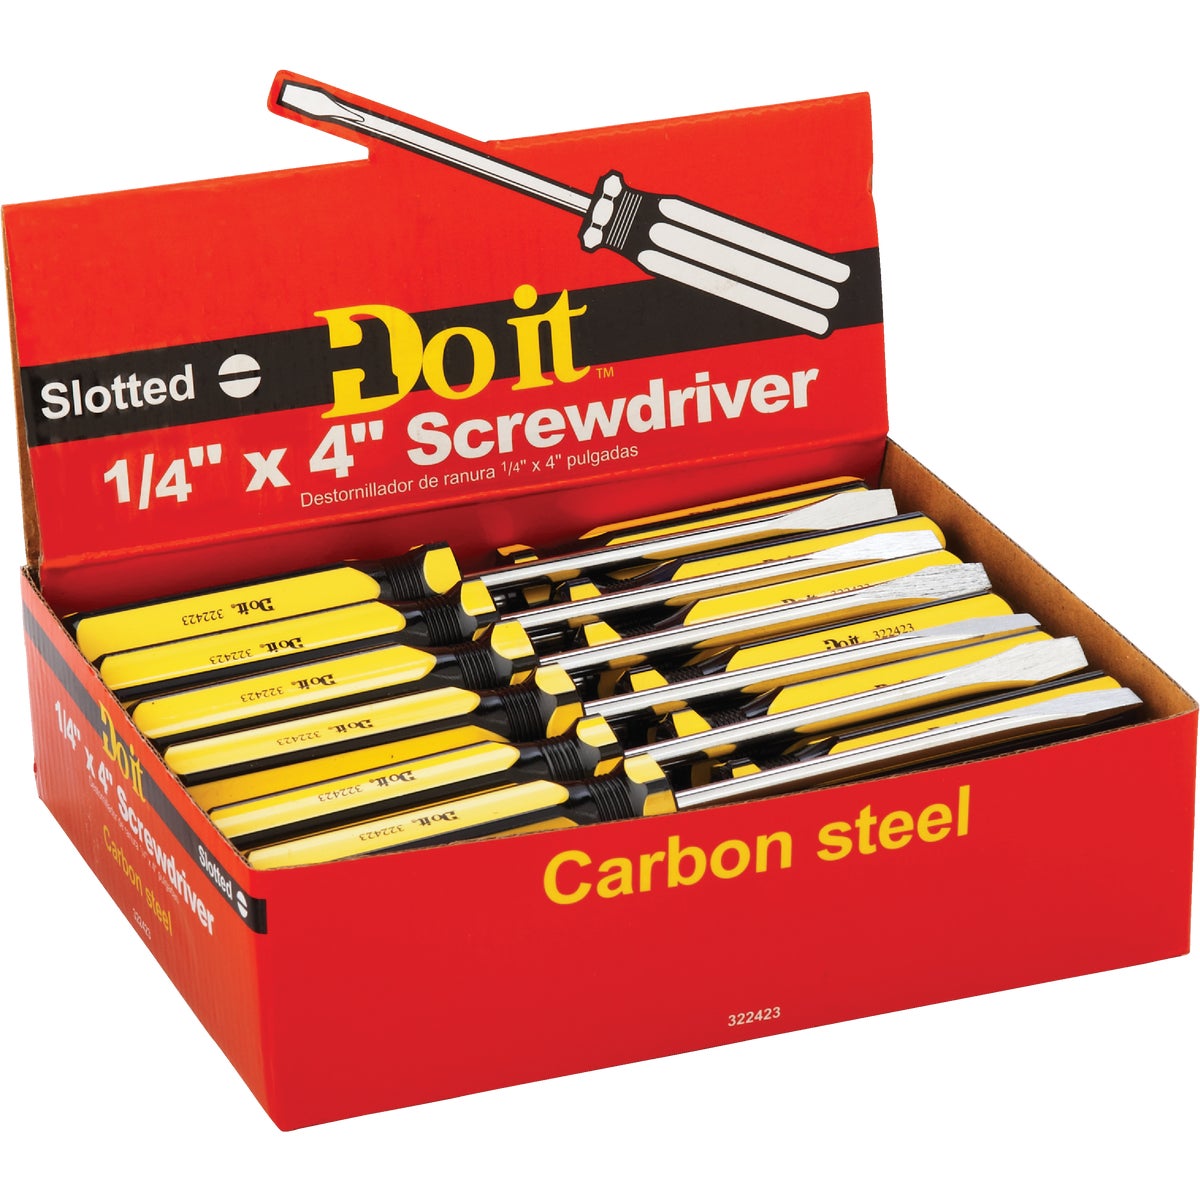 Do it 1/4 In. x 4 In. Slotted Screwdriver Impulse Display